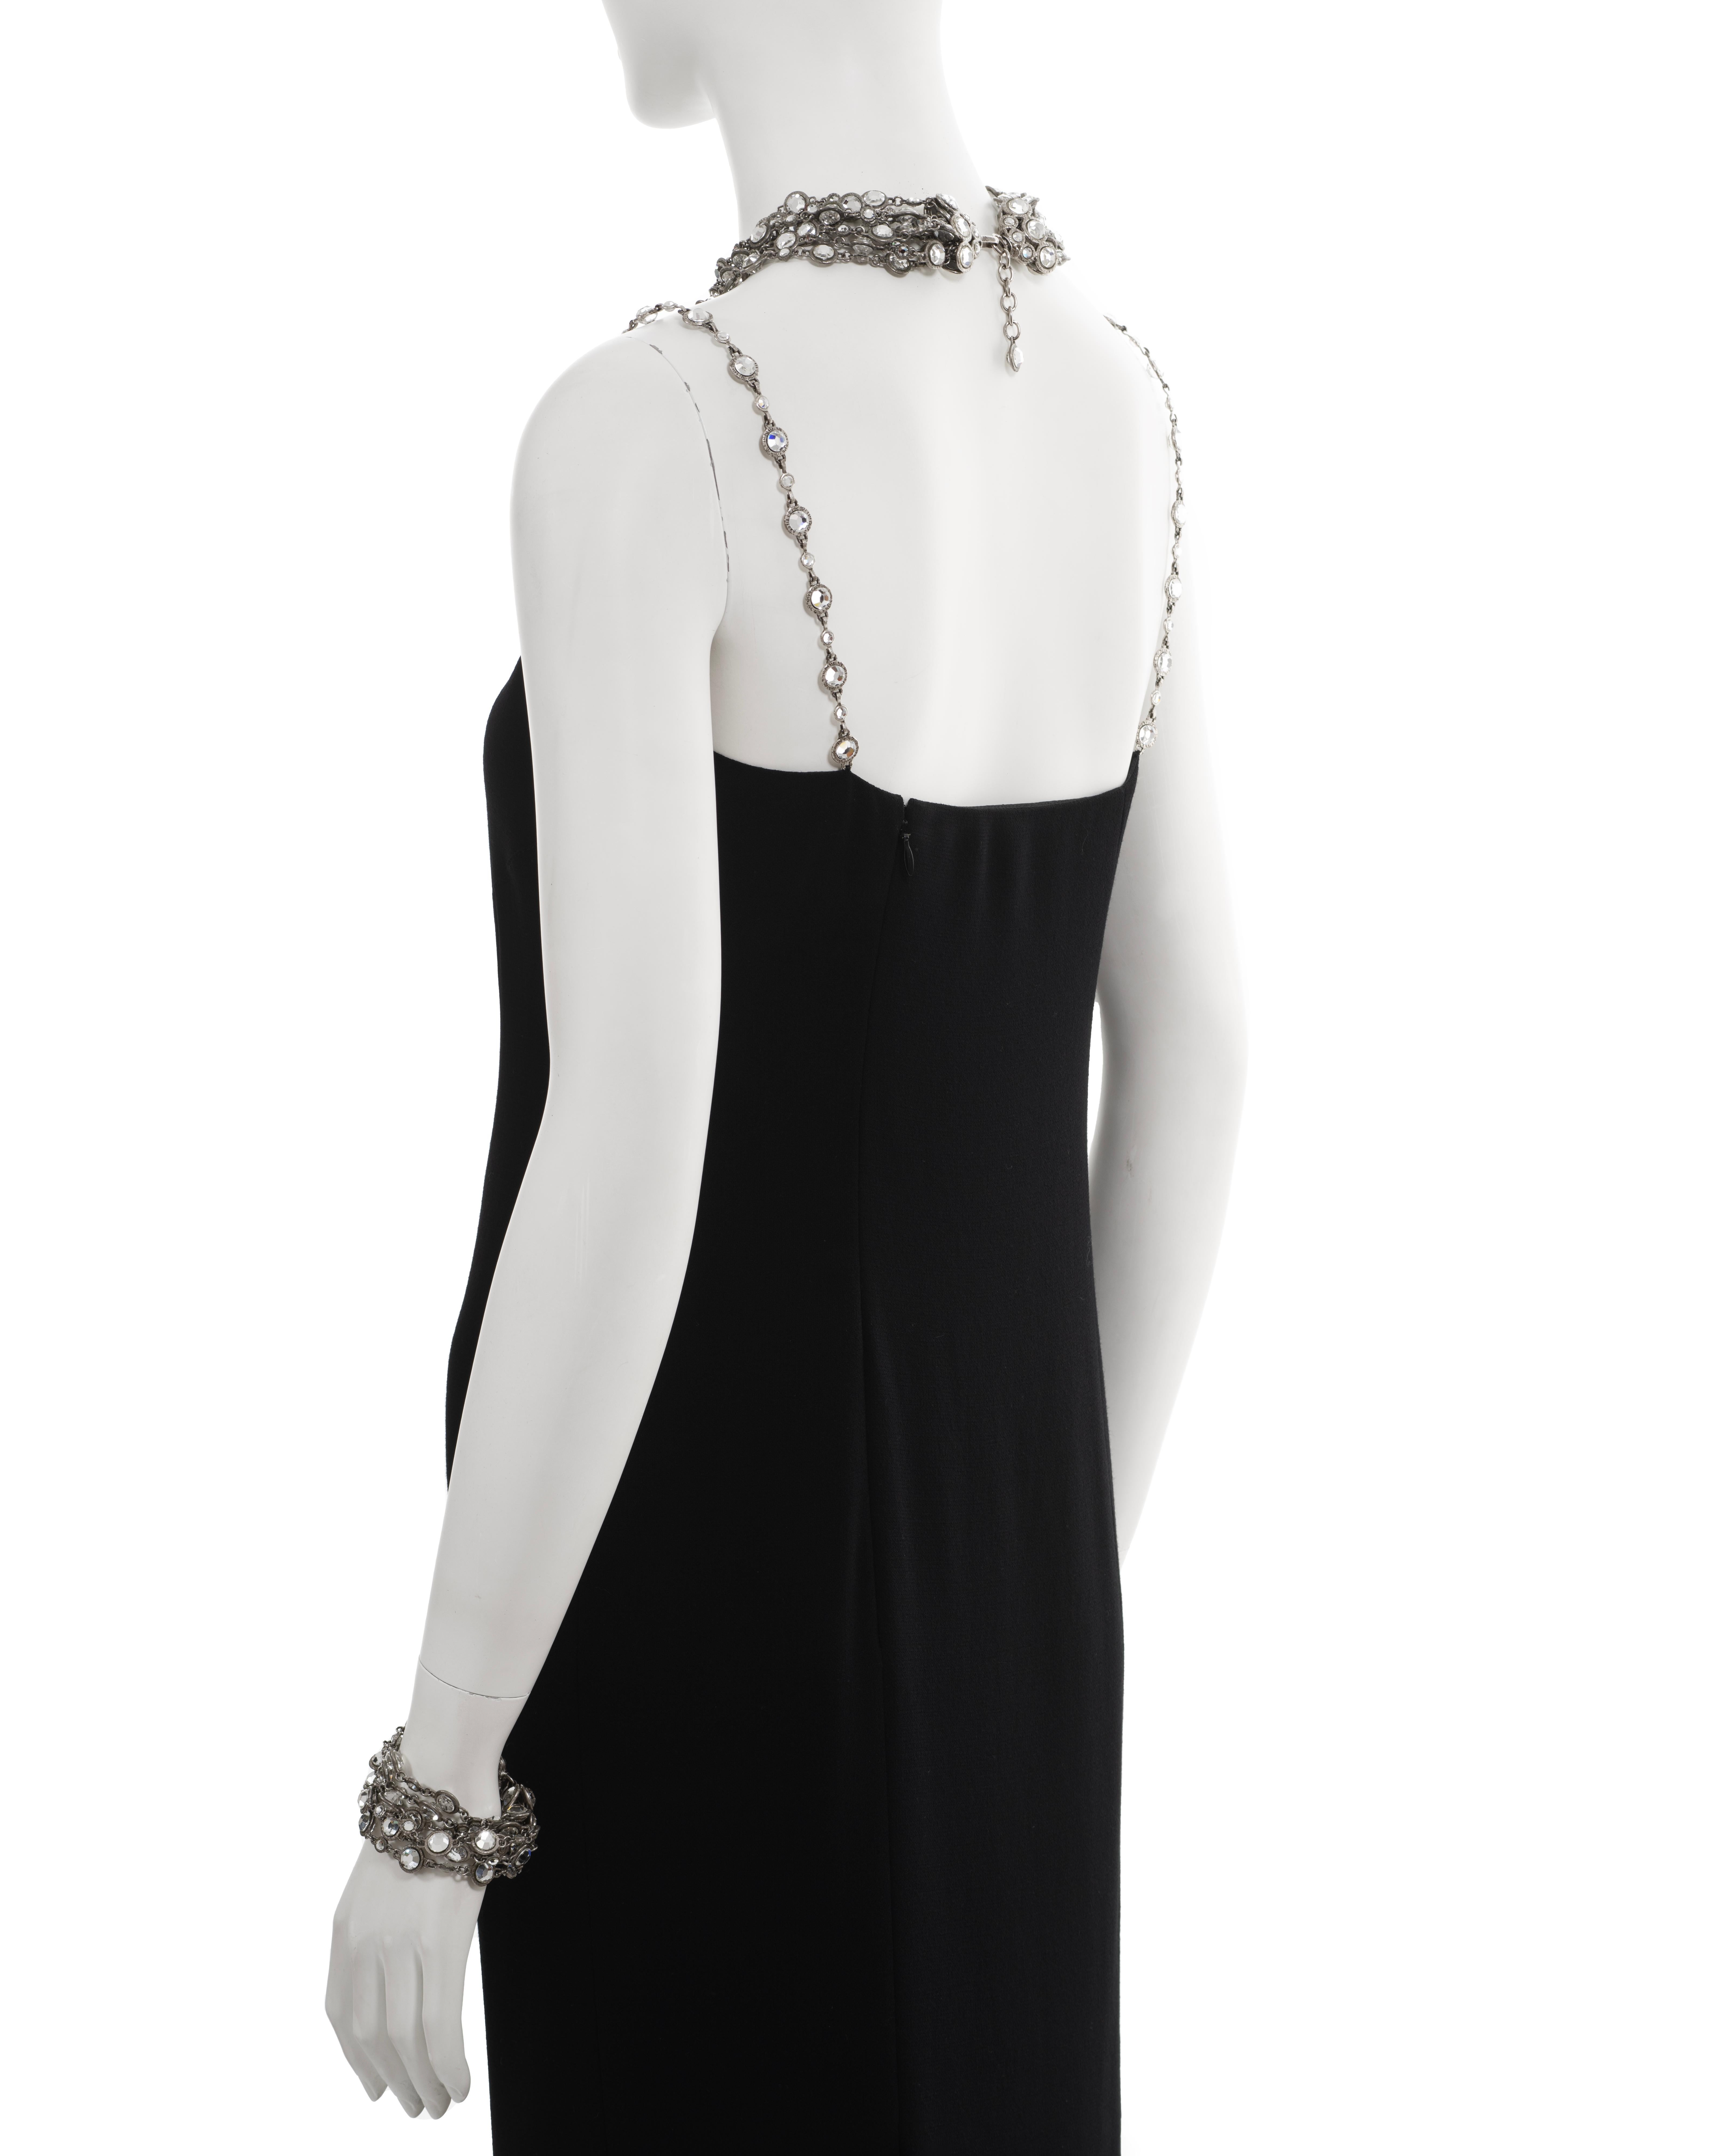 Chanel by Karl Lagerfeld black evening dress with crystal jewellery set, ss 1998 For Sale 12